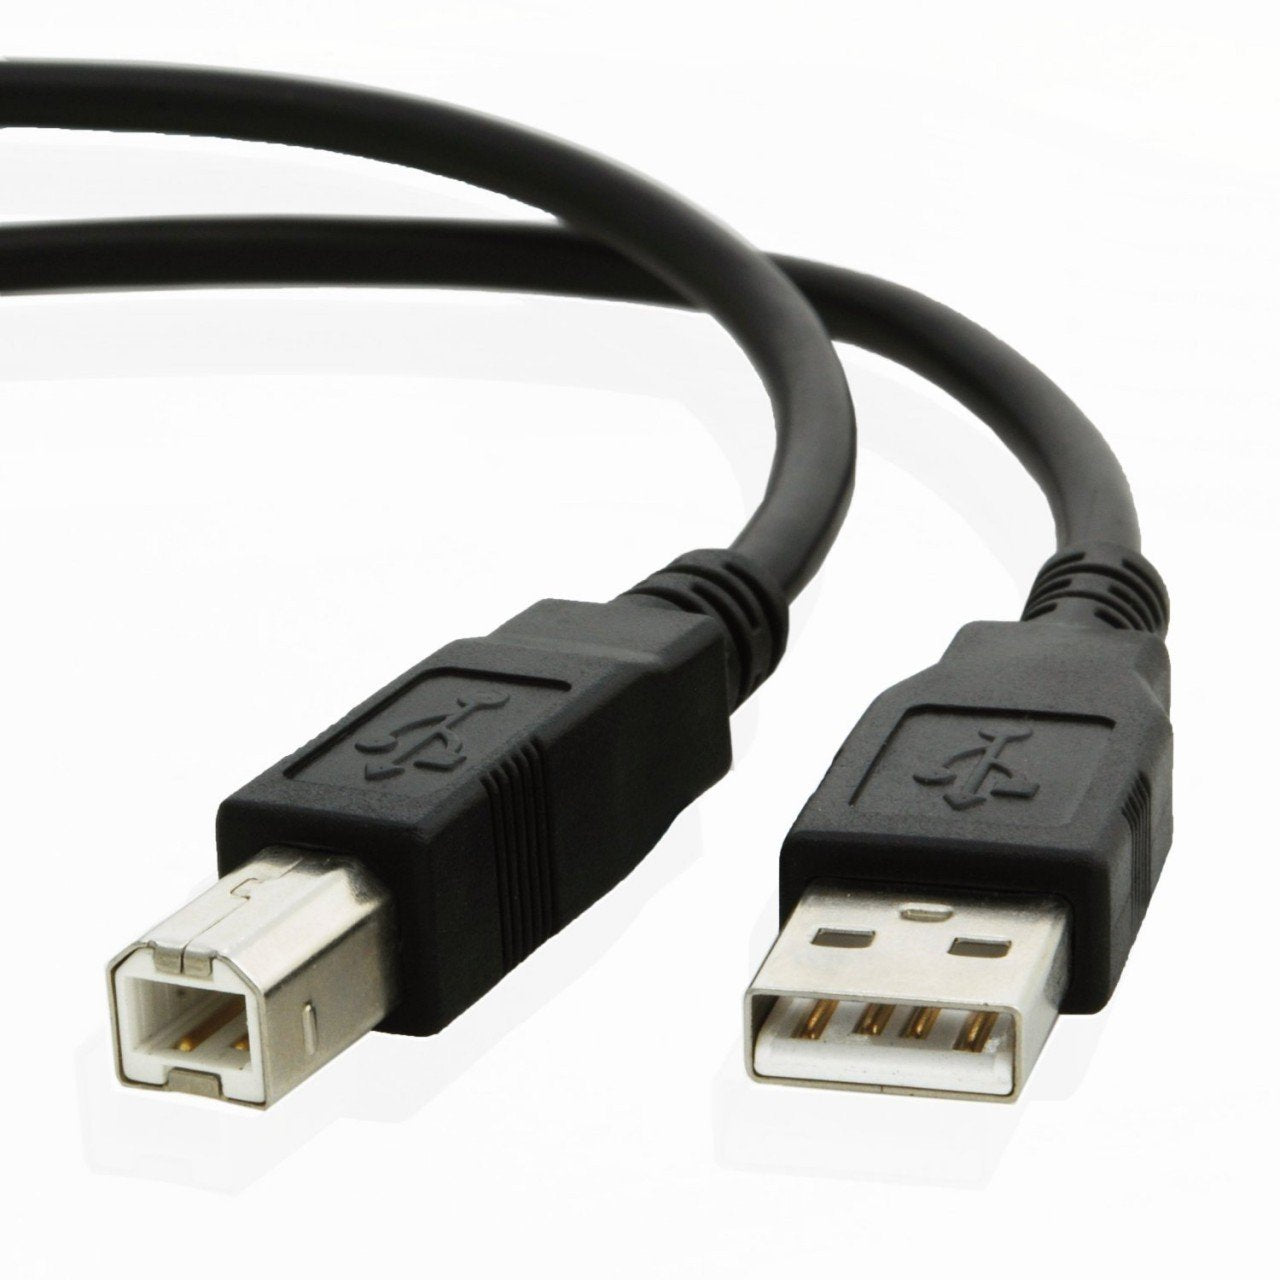 USB cable for Zebra ZD500